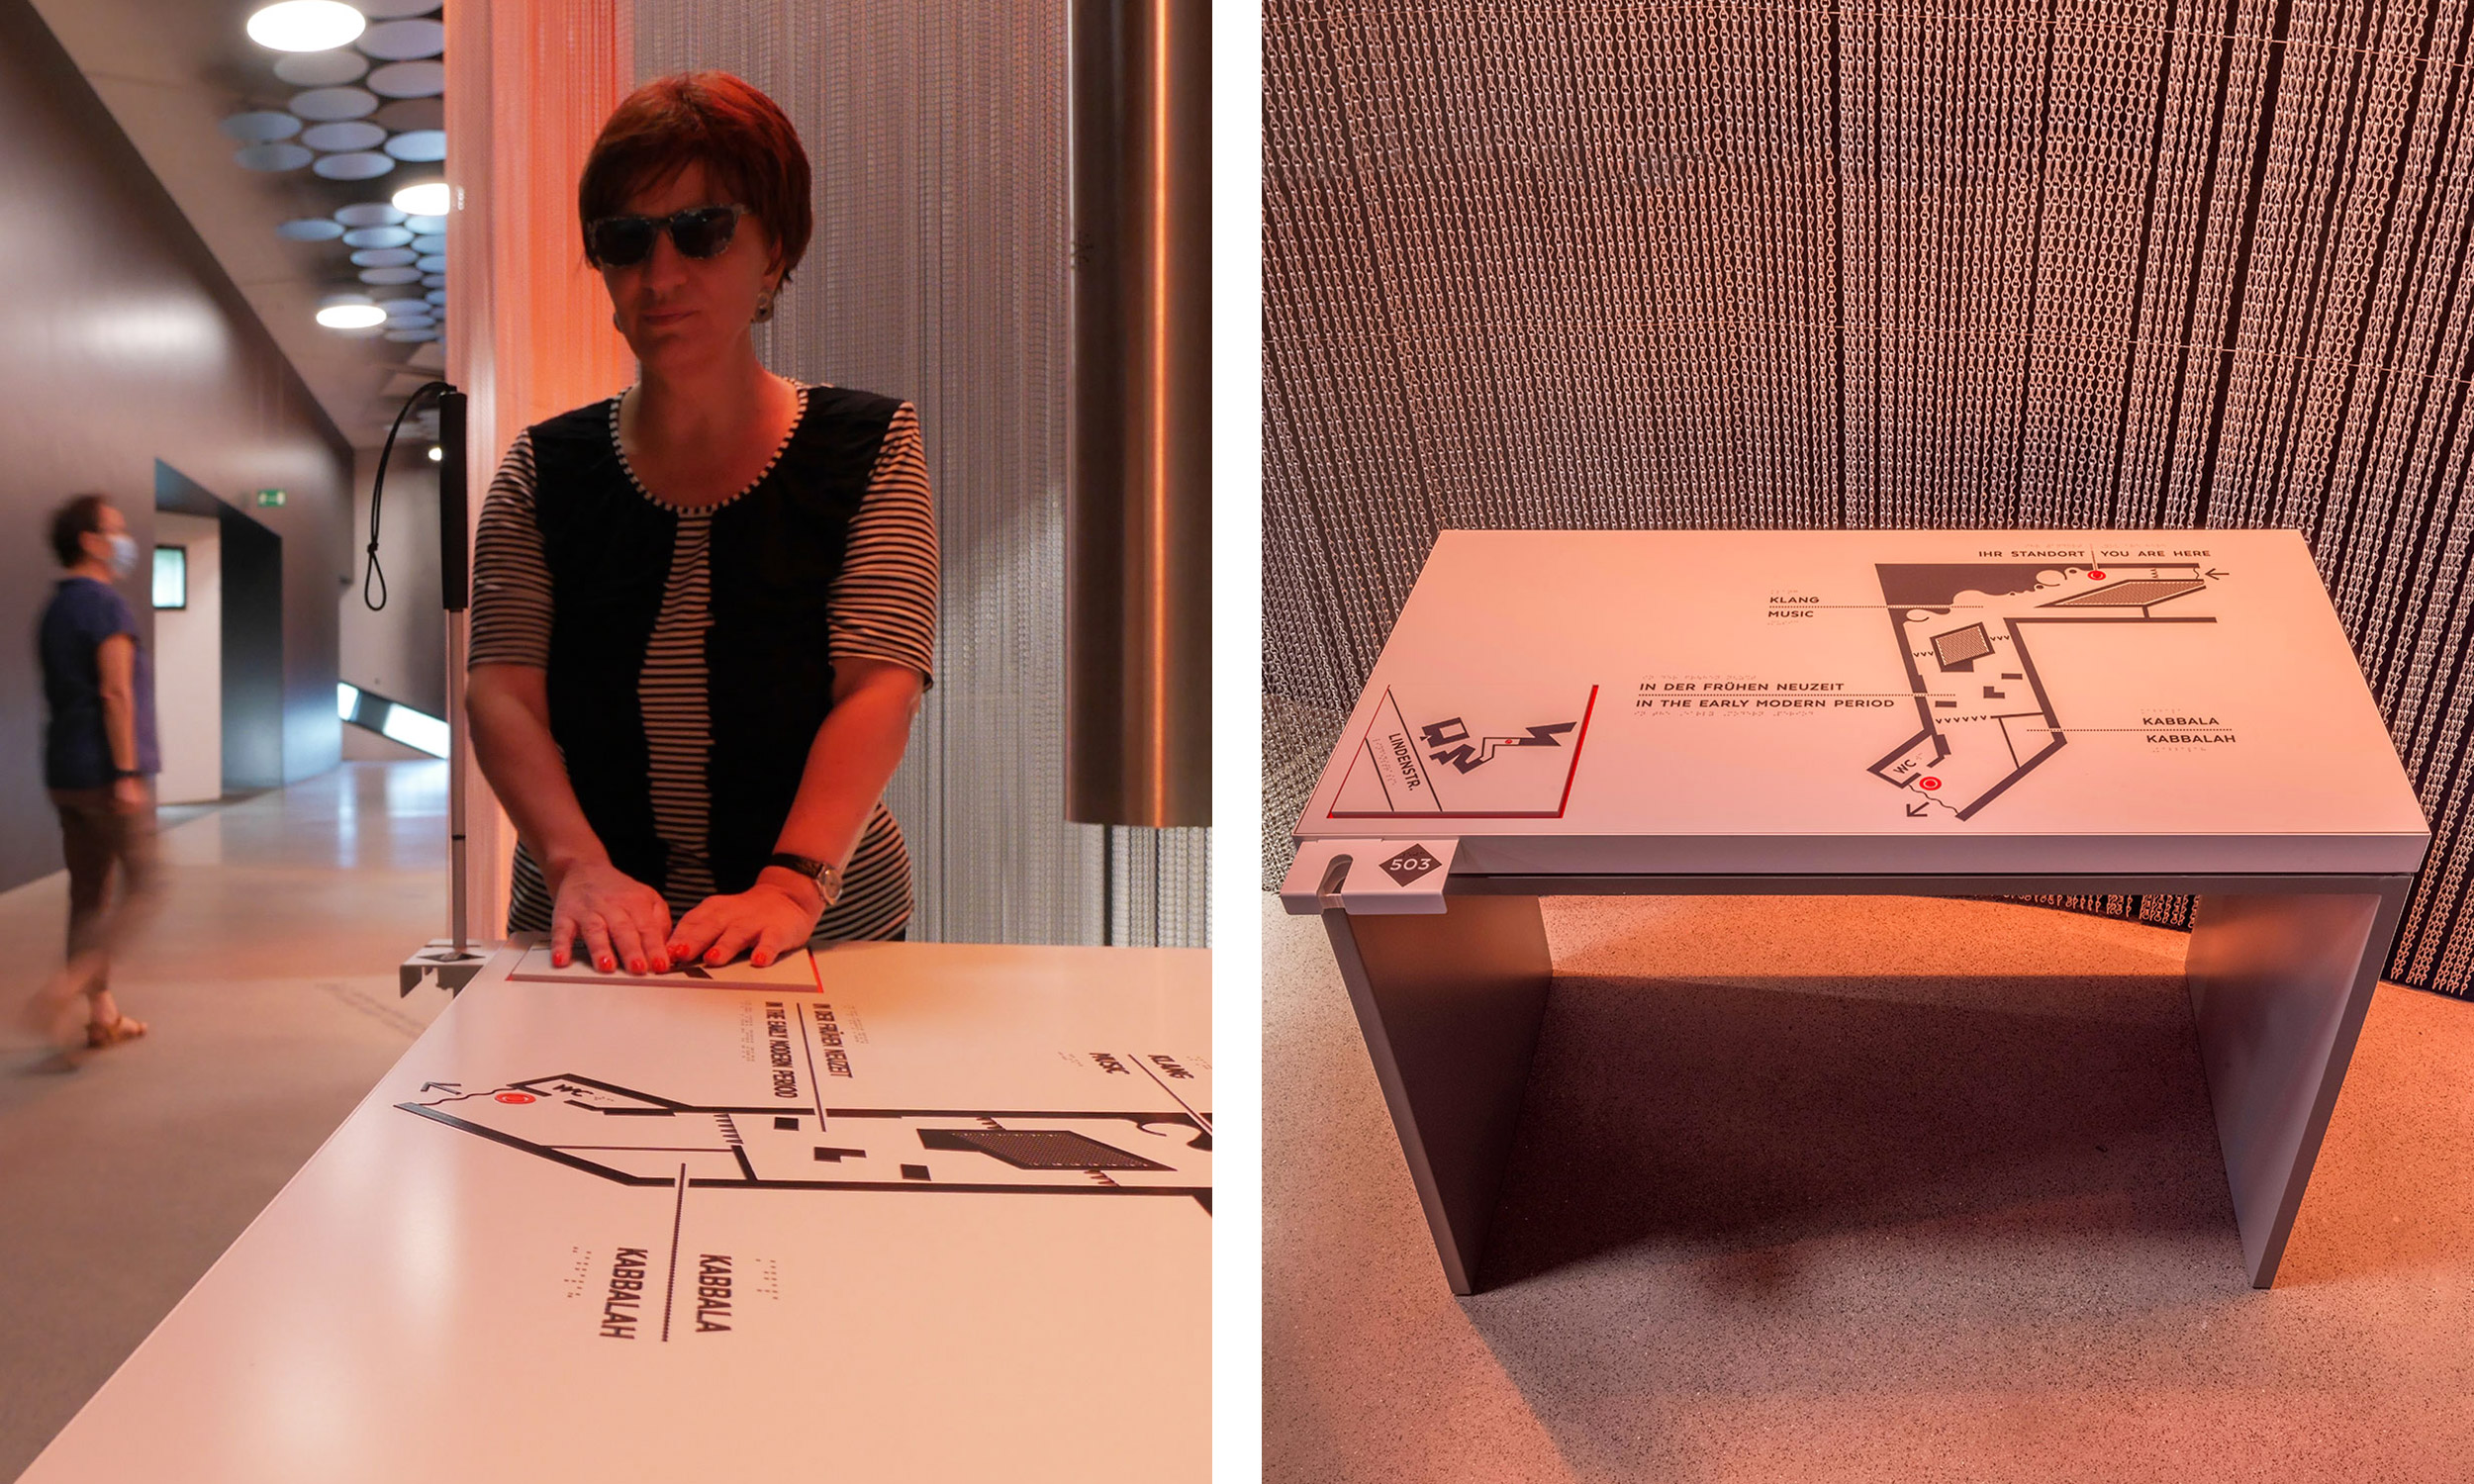 Two photos of a tactile map in the Jewish Museum in Berlin on a table. In the left photo, a woman standing at the side of the table is feeling parts of the plan. A cane holder is attached to the left of the tactile plan.